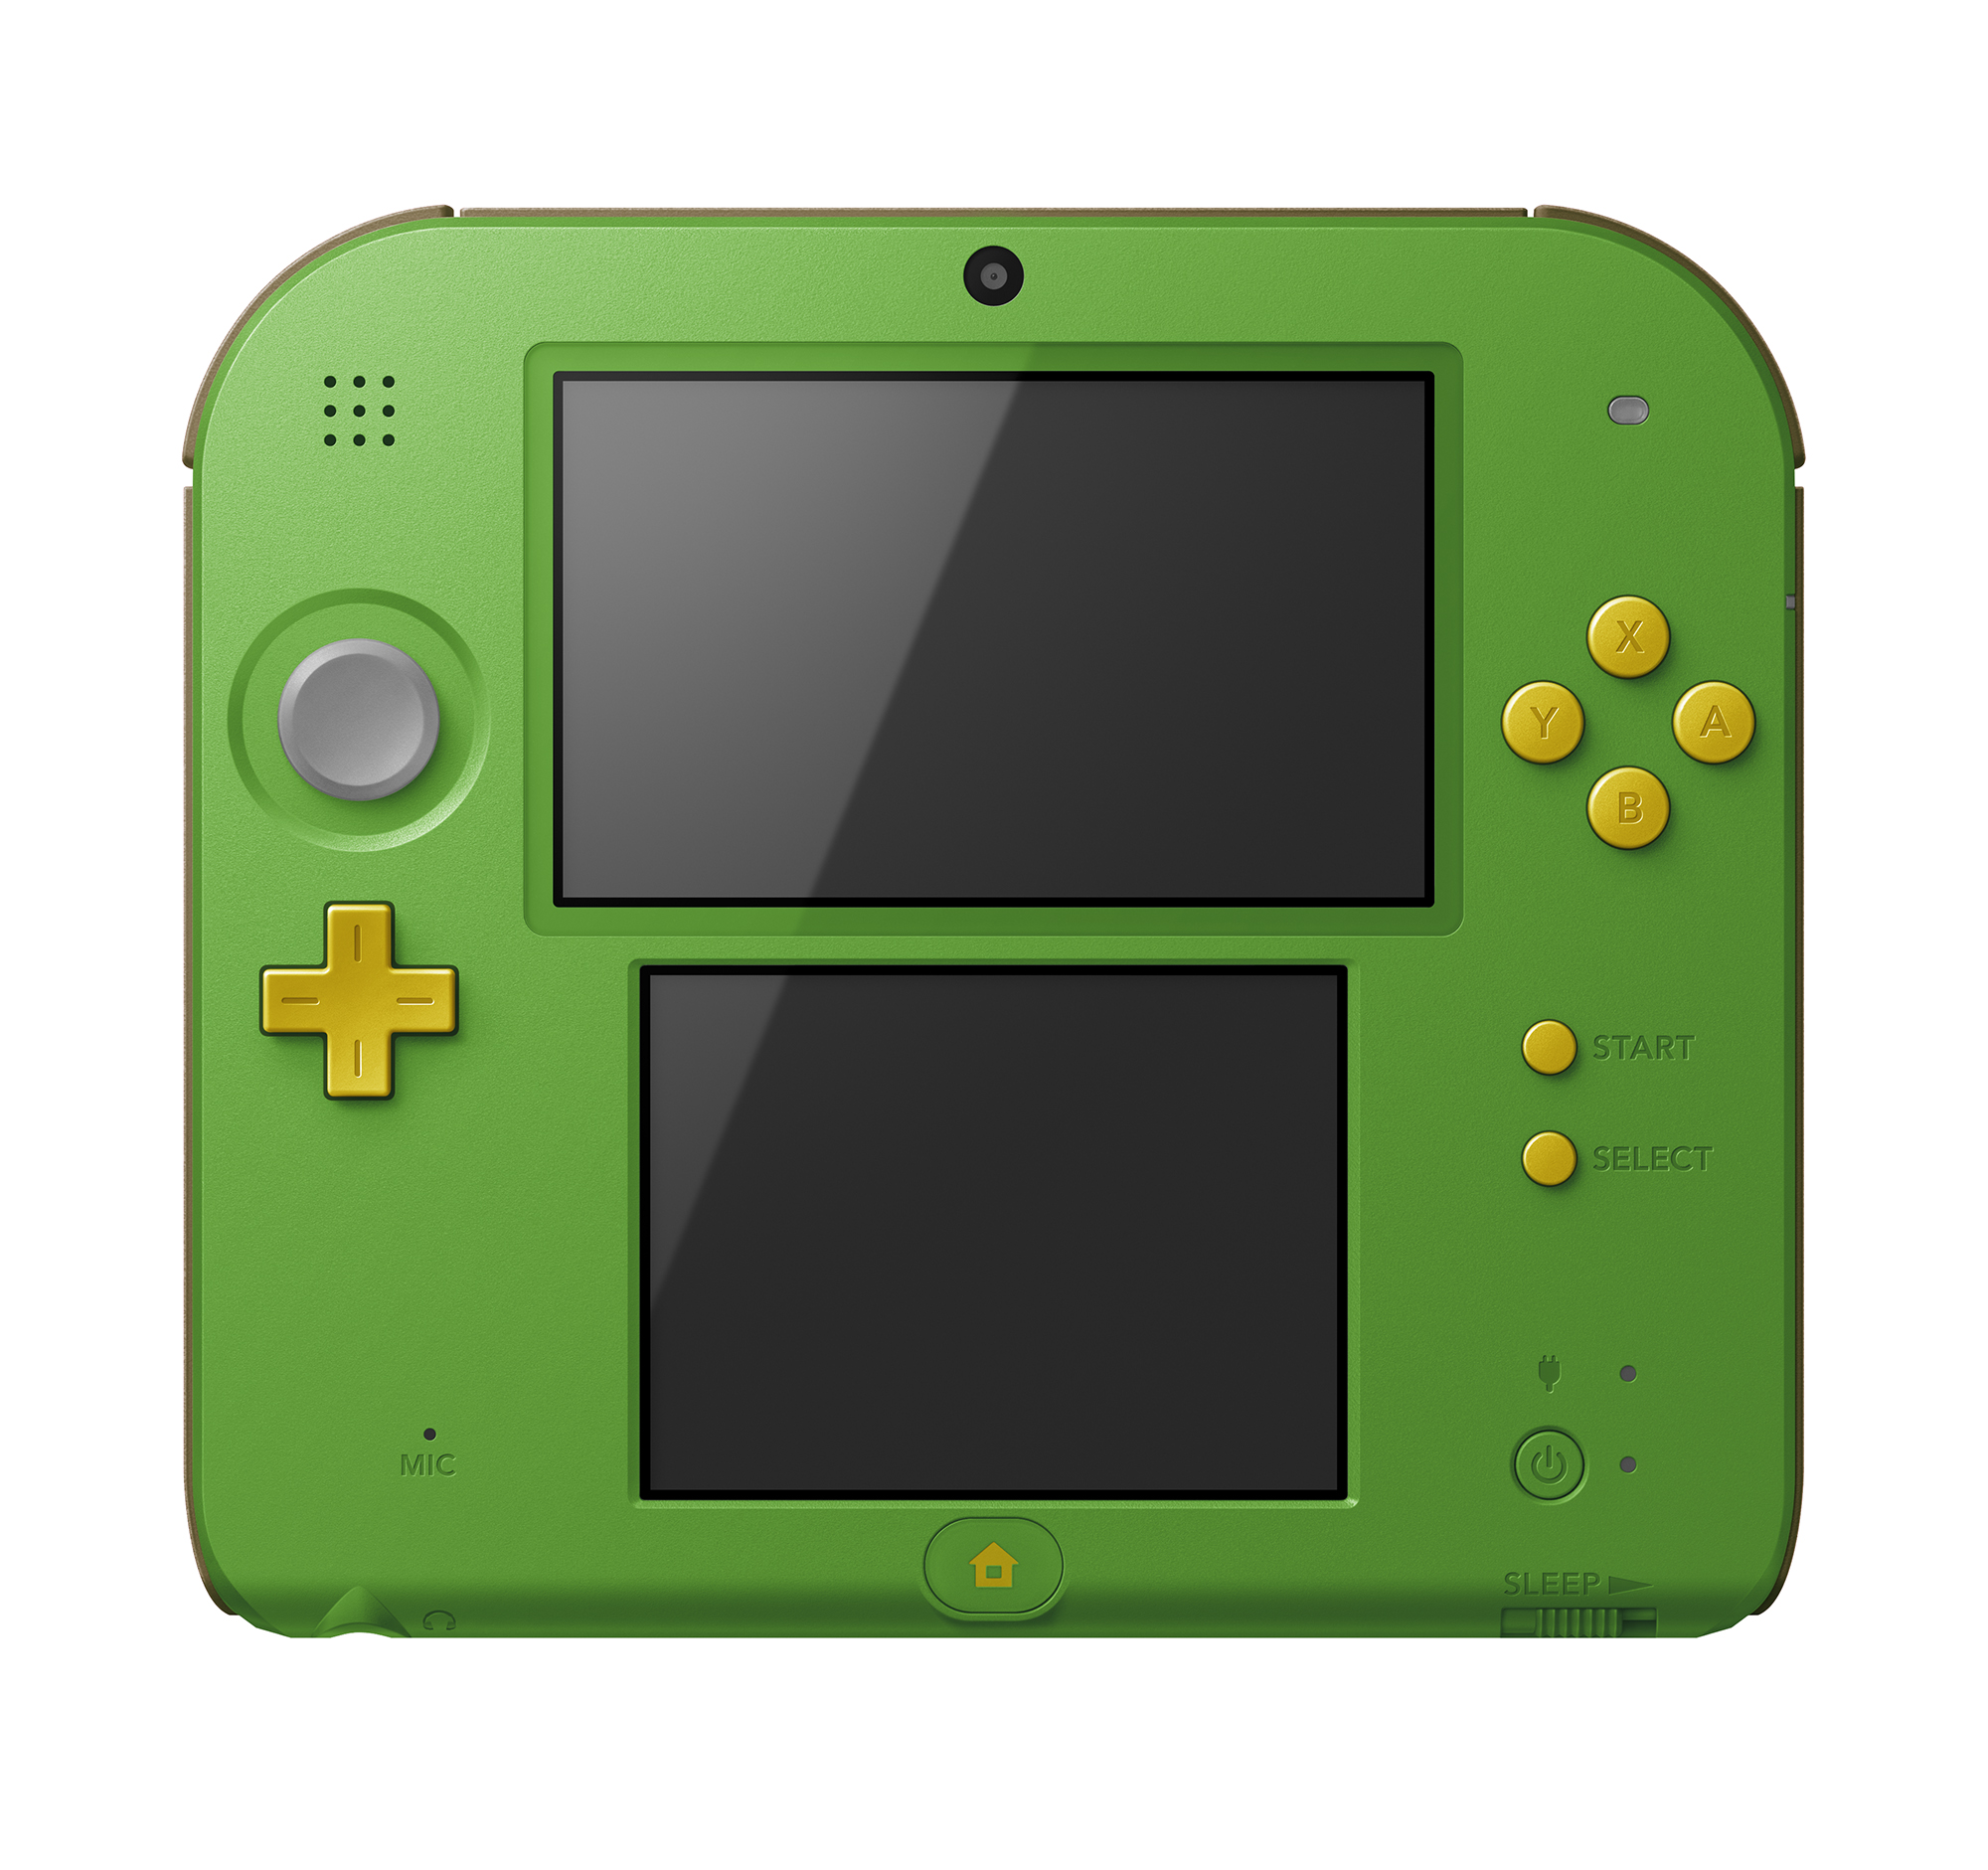 Nintendo 2DS System with The Legend of Zelda: Ocarina of Time 3D - image 5 of 6